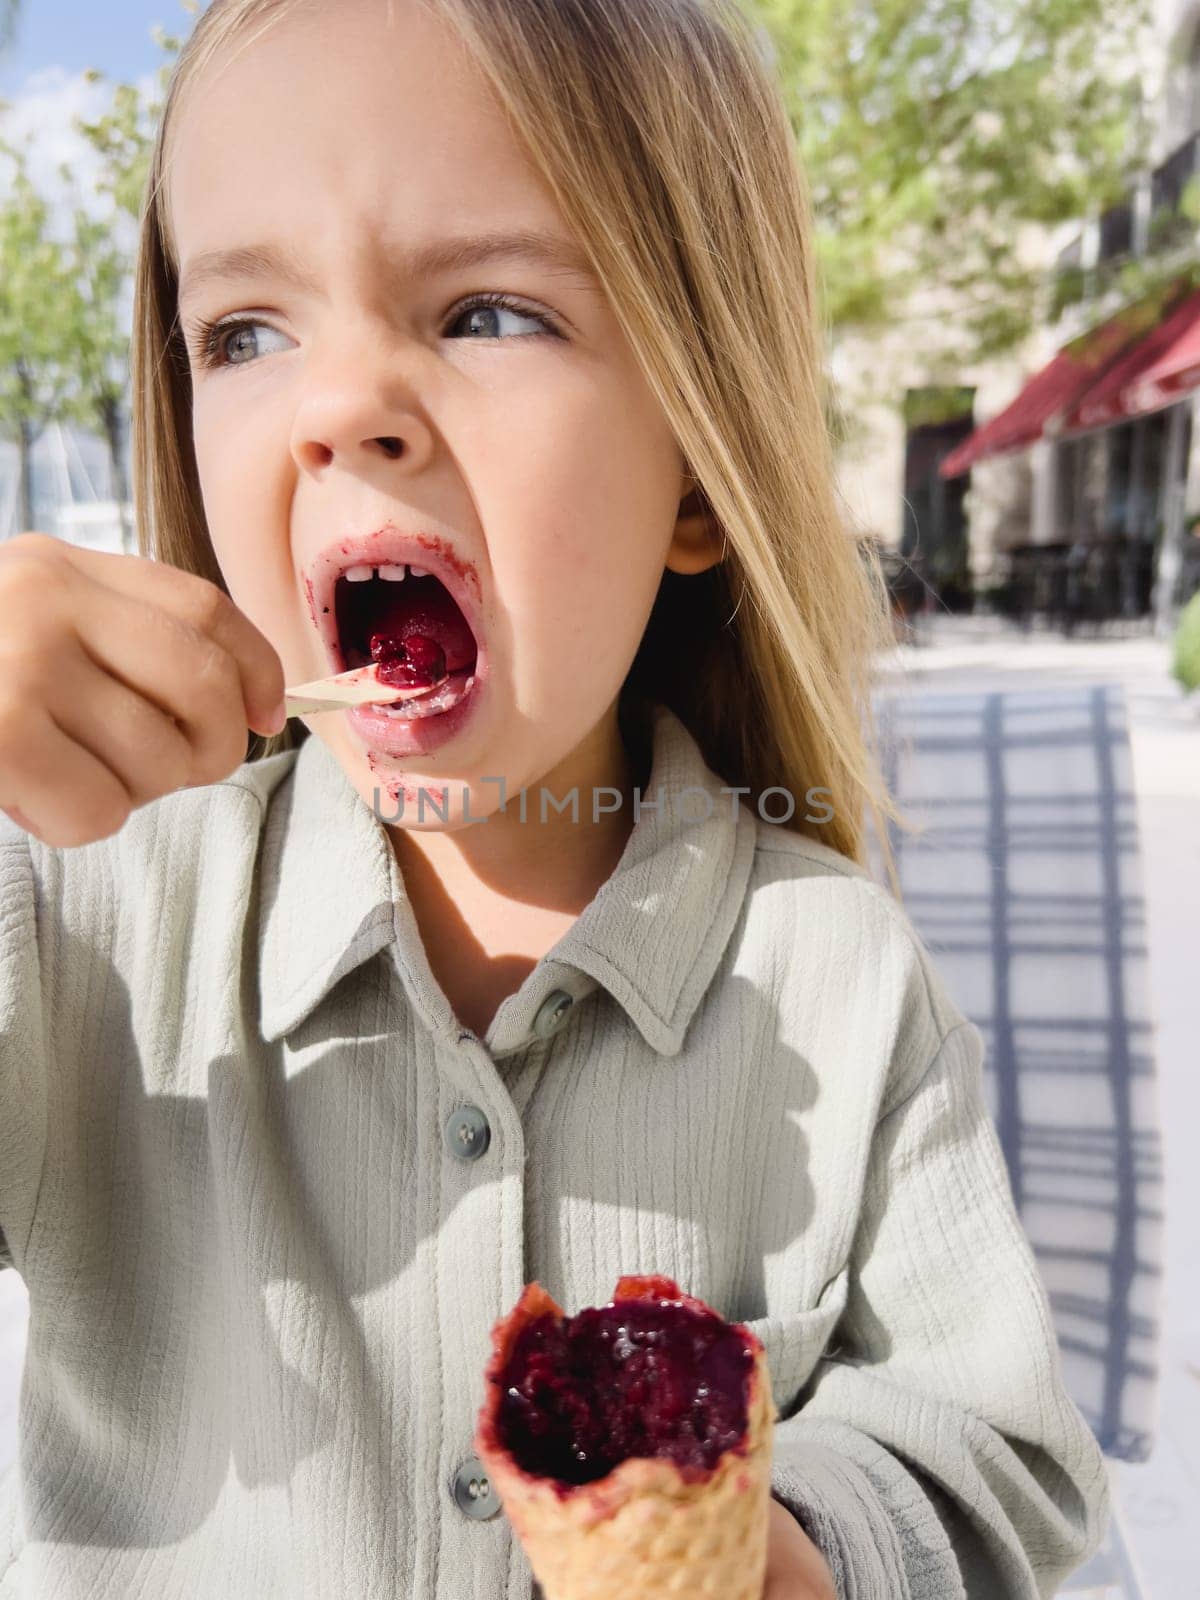 Little girl with stained mouth eating popsicles with a spoon by Nadtochiy